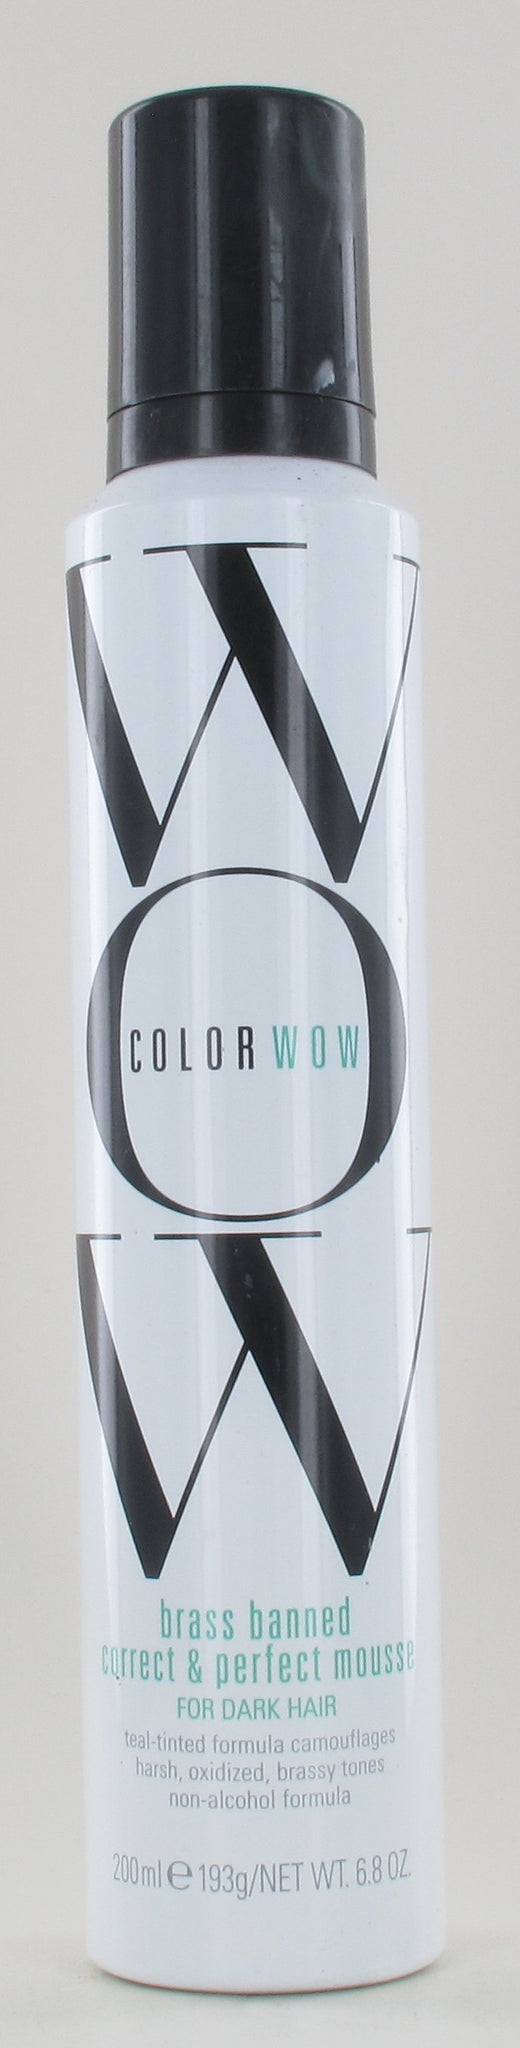 Color WOW Brass Banned Correct & Perfect Mousse 6.8 oz